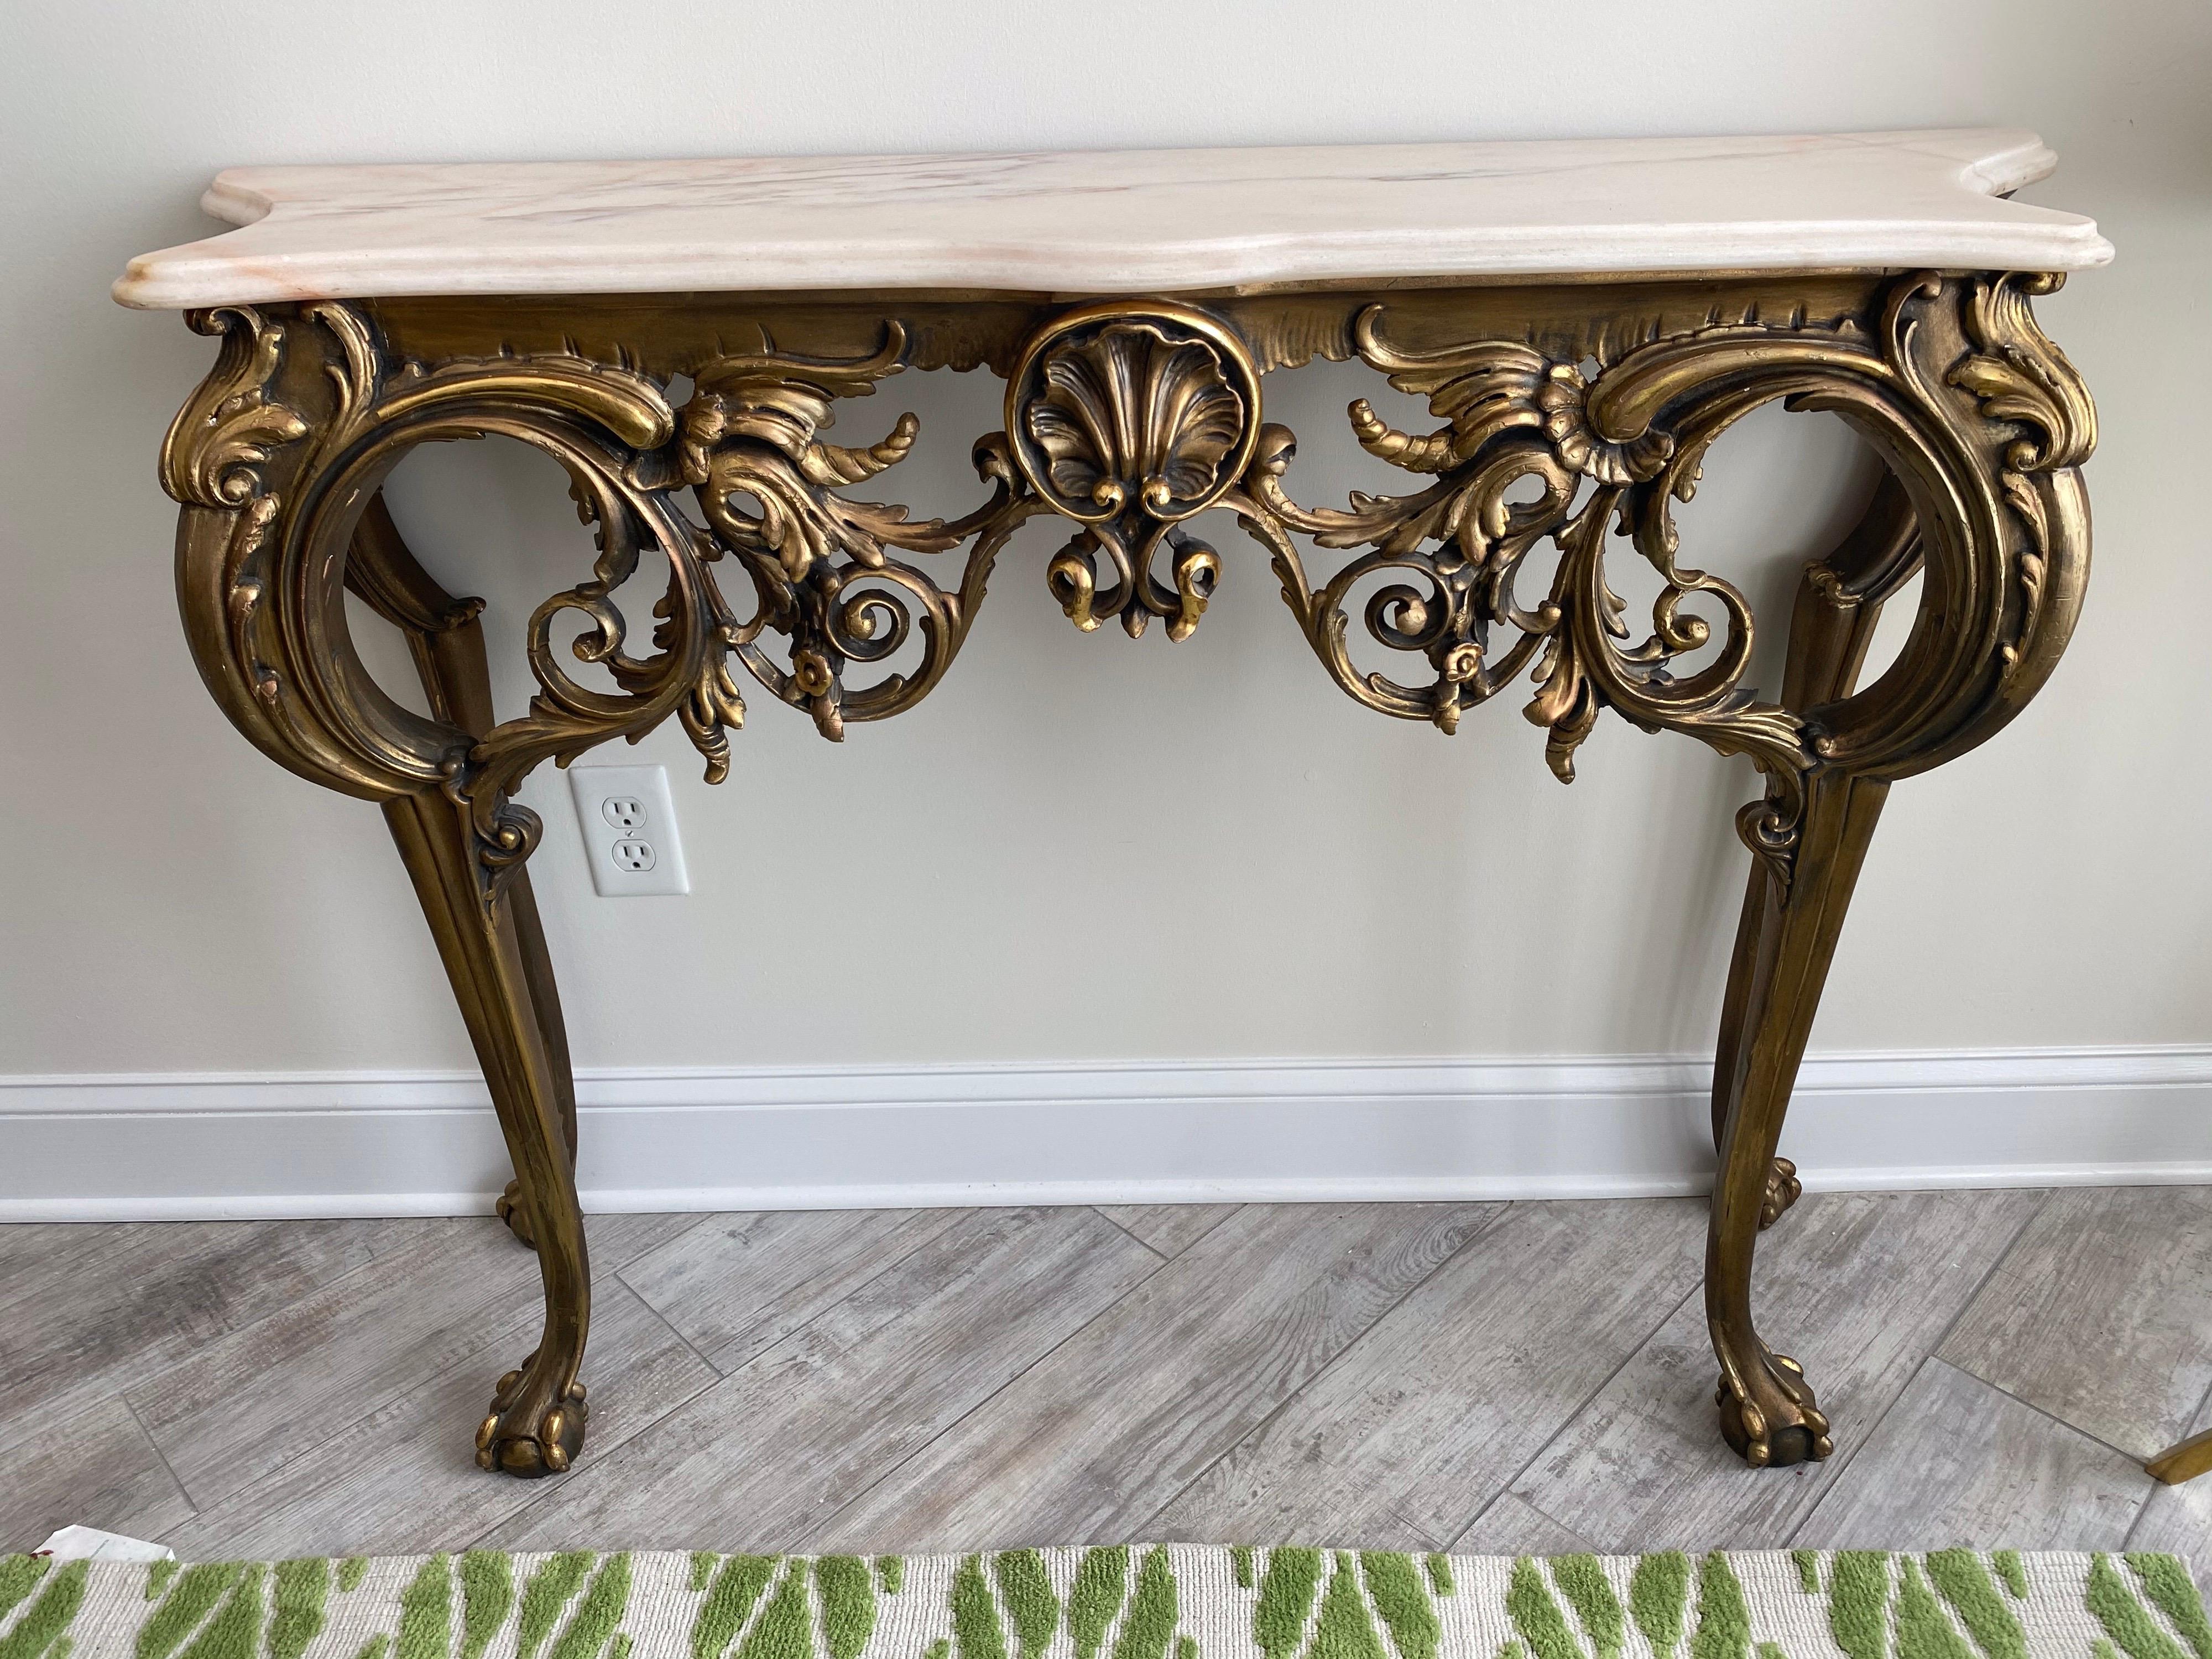 Carved and gilded Baroque style console with marble top.